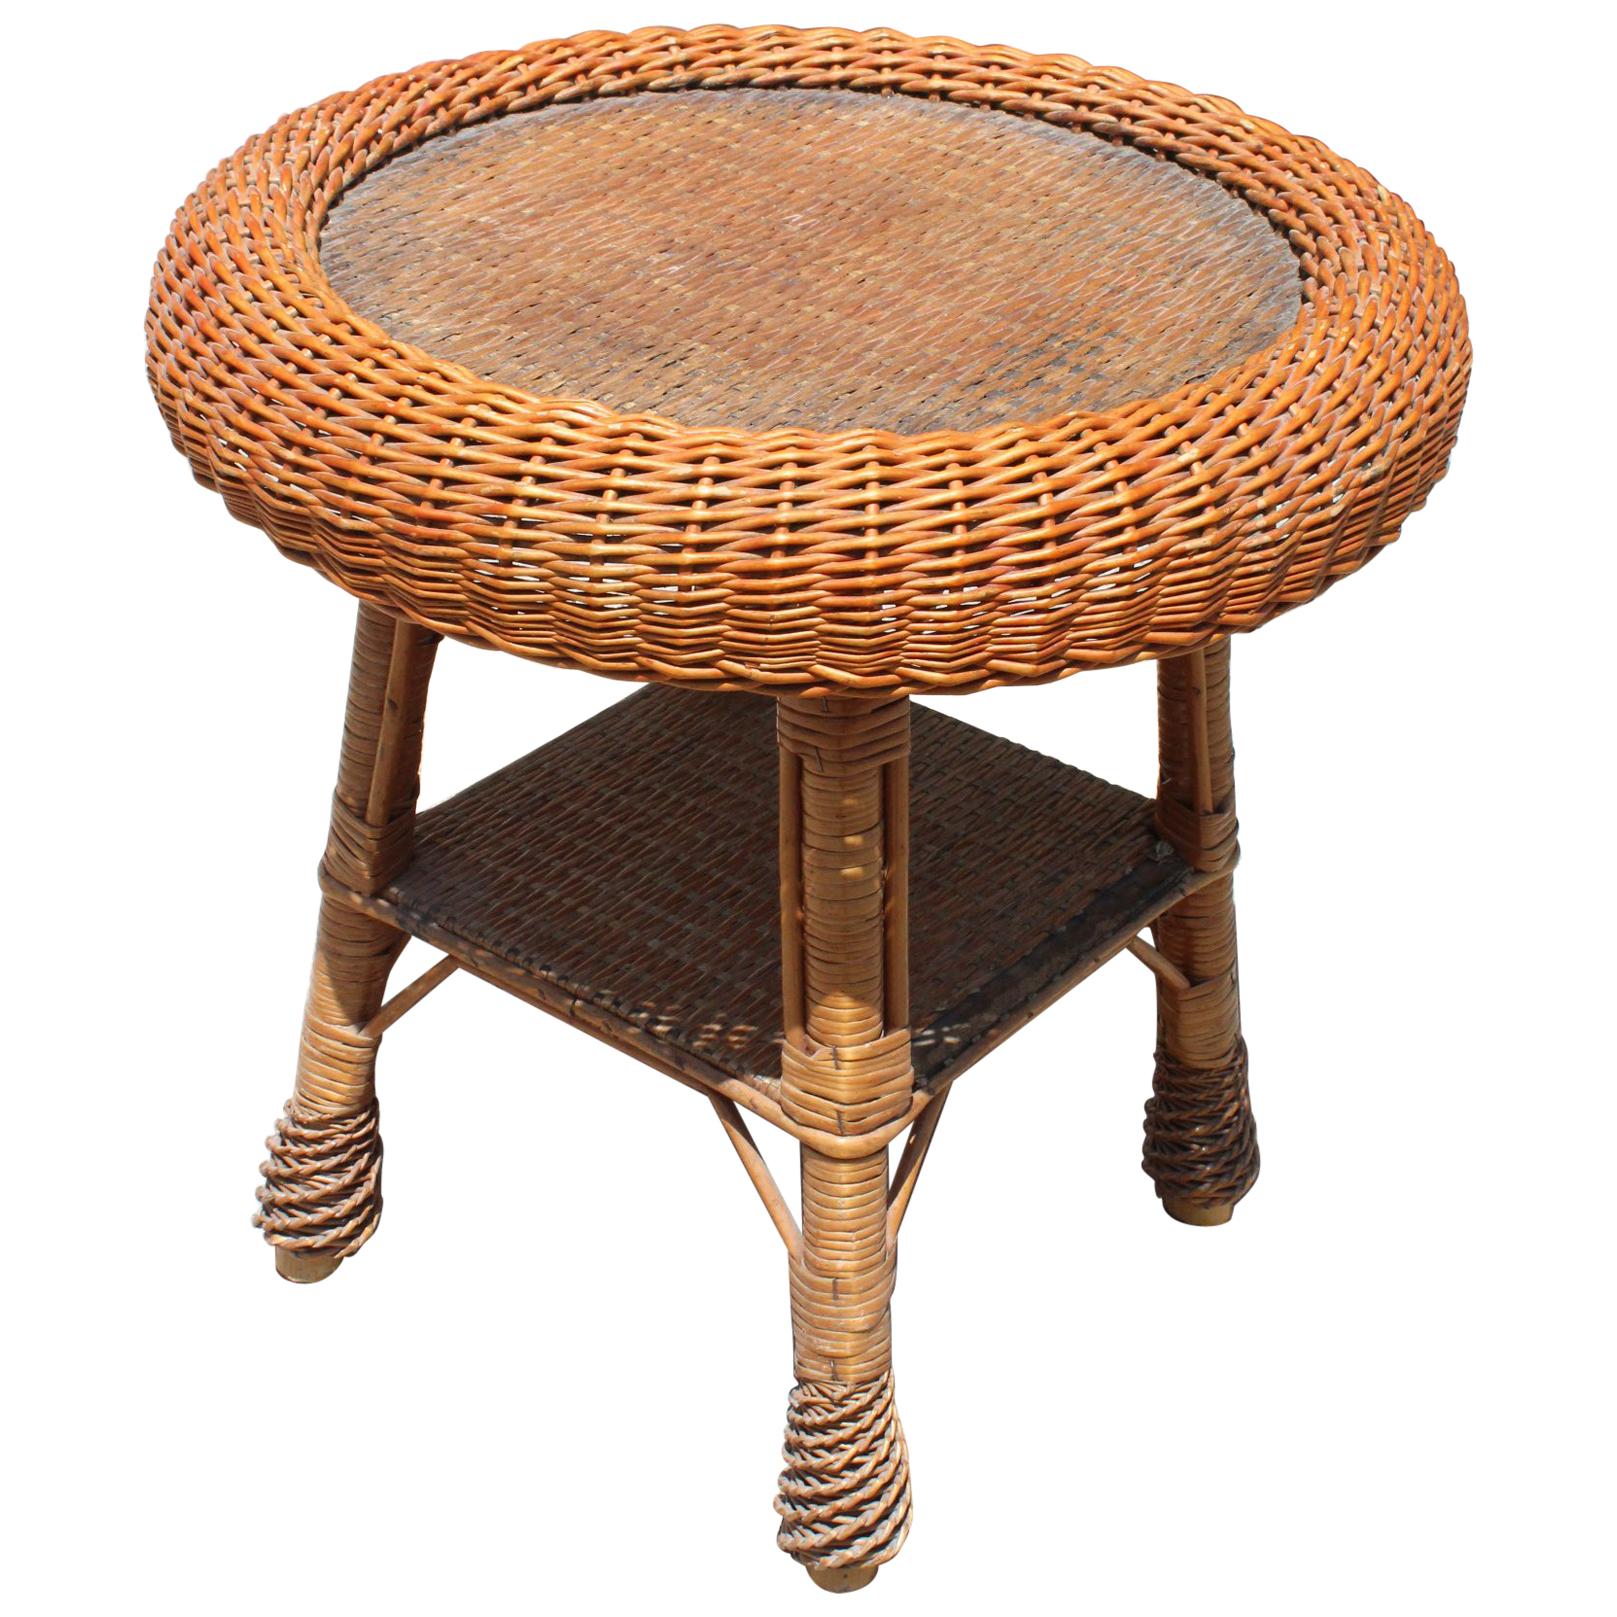 1980s Spanish Wicker Round Side Table